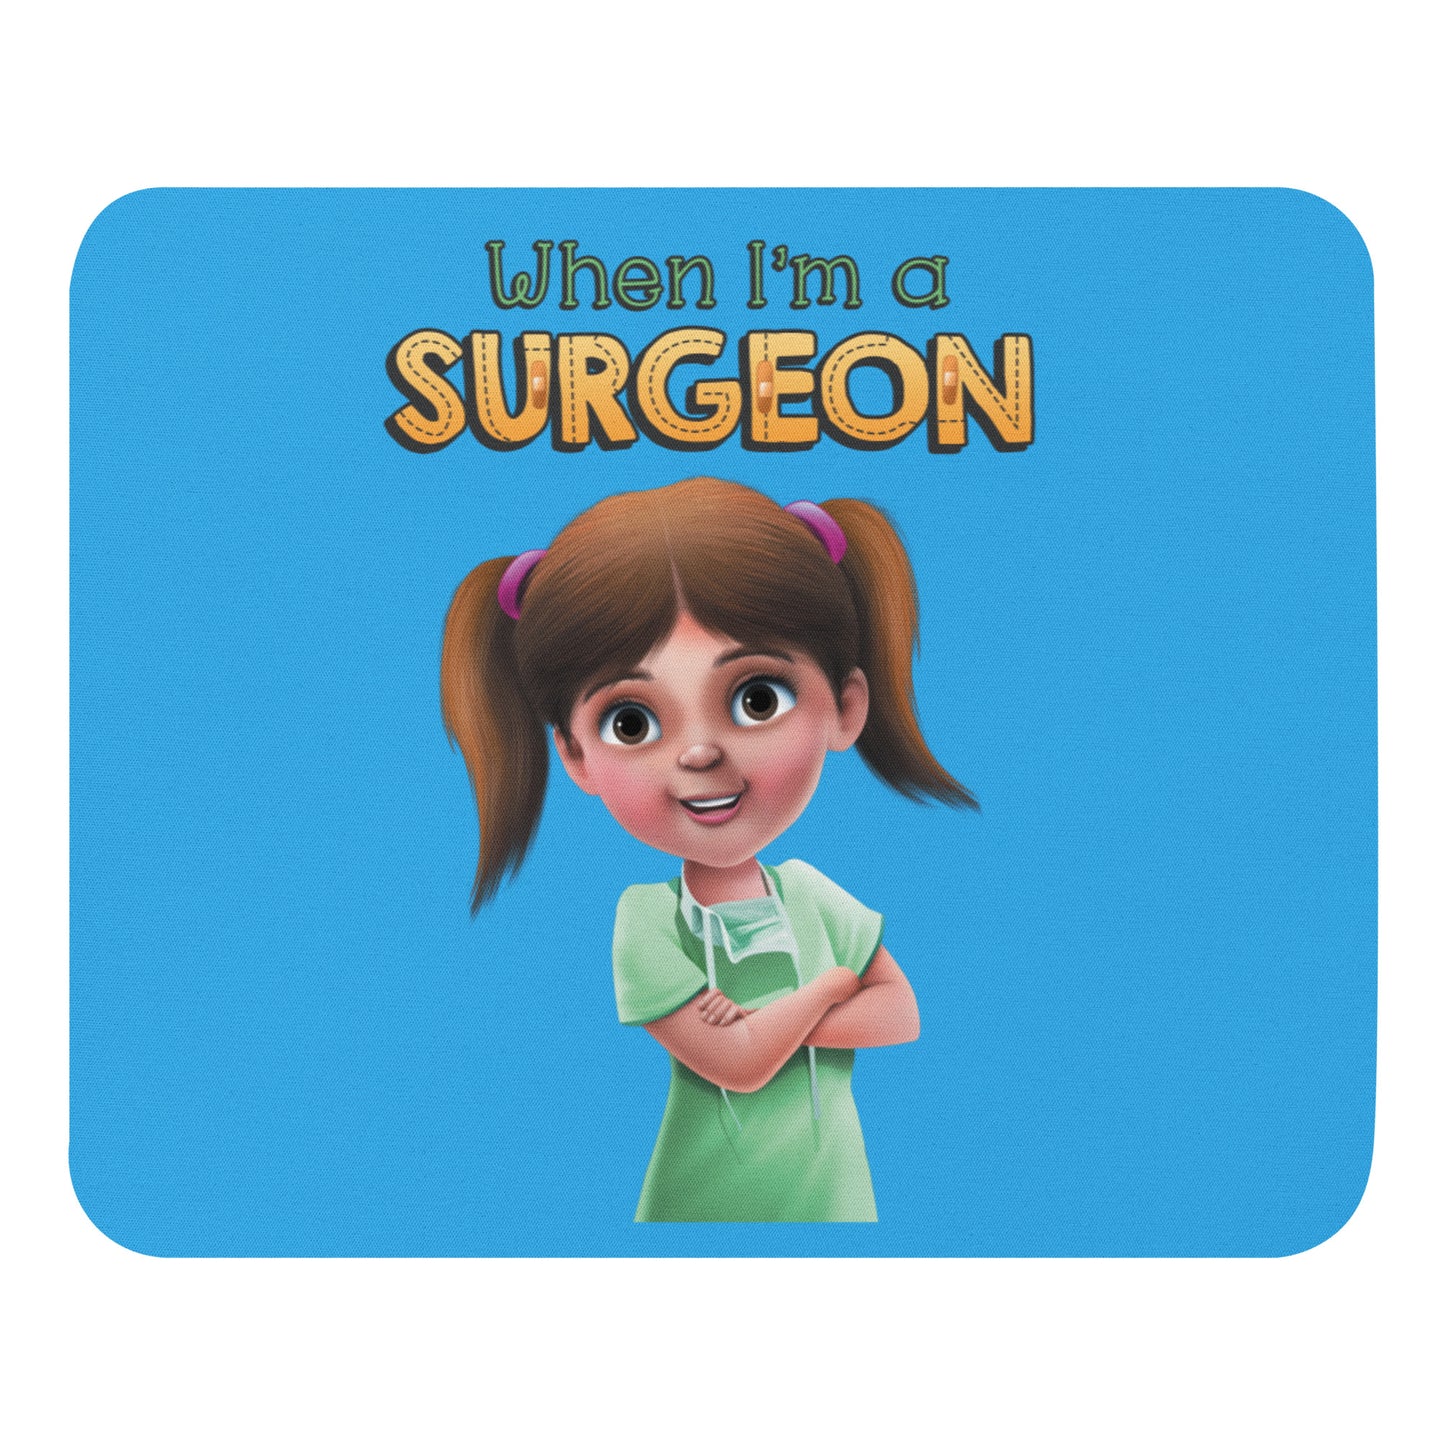 The best, cute, fun mouse pad for a doctor or future surgeon.